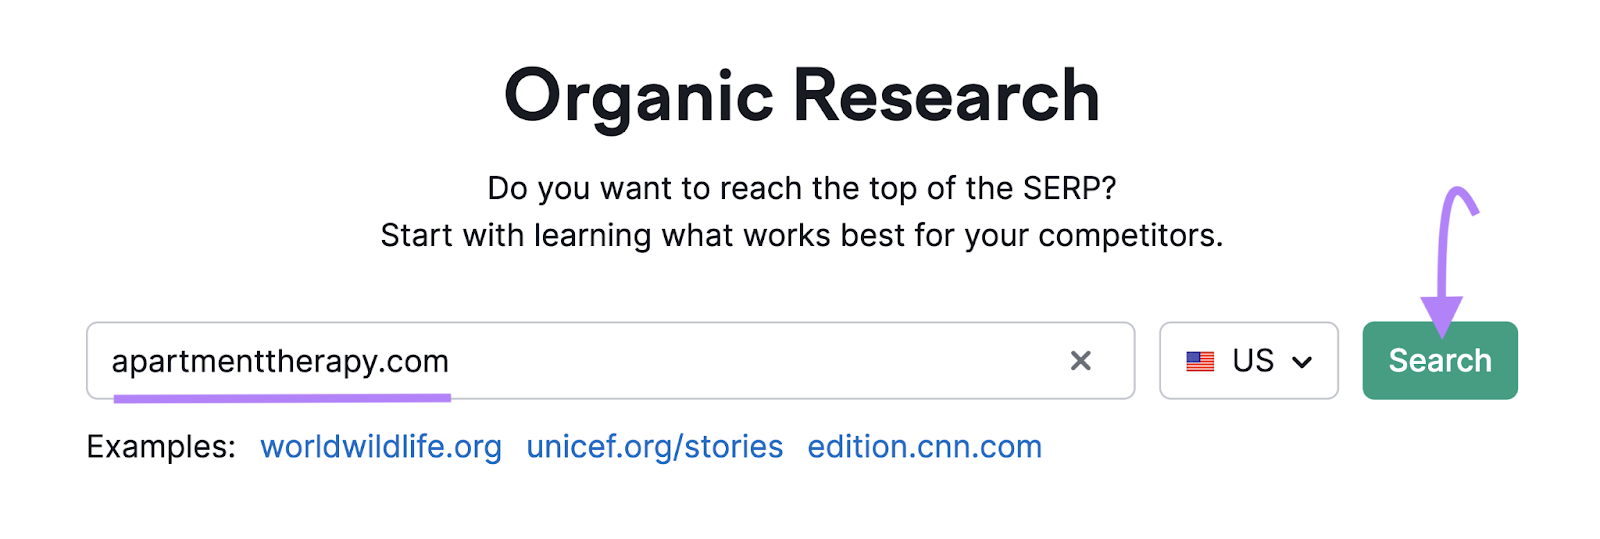 "apartmenttherapy.com" entered into the Organic Research search bar